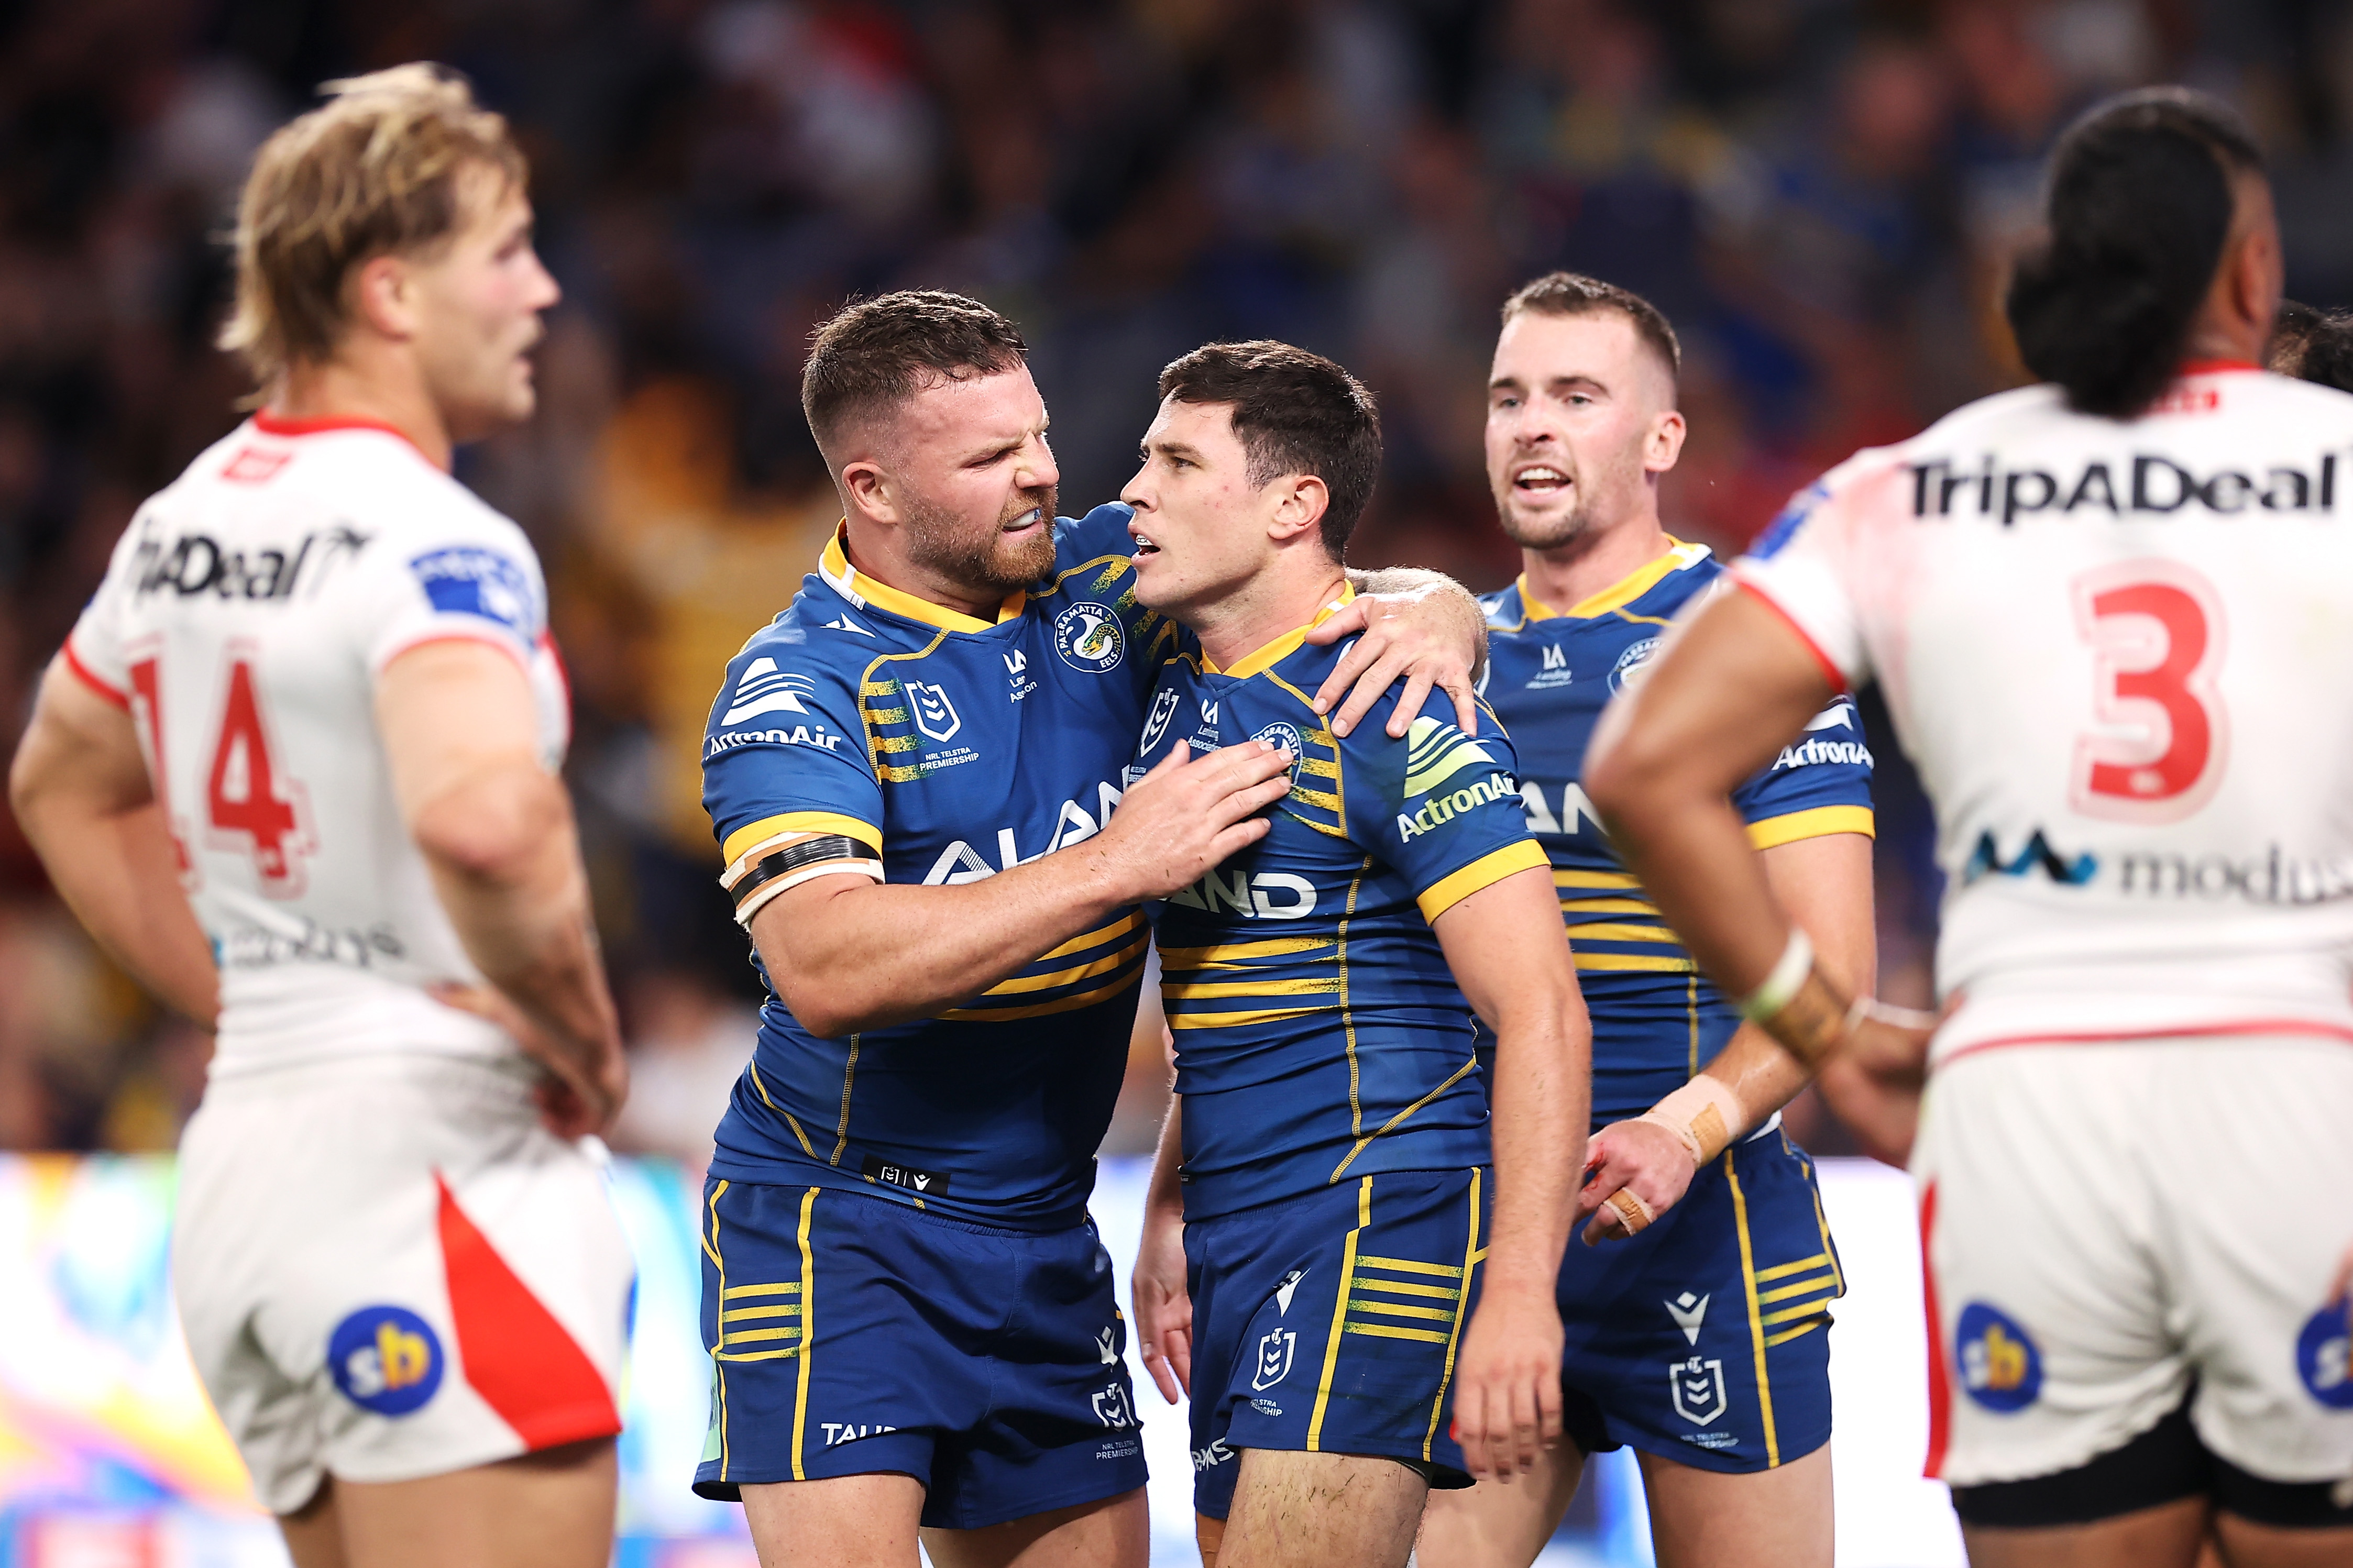 Nathan Brown of the Eels congratulates Mitchell Moses as he celebrates a try.